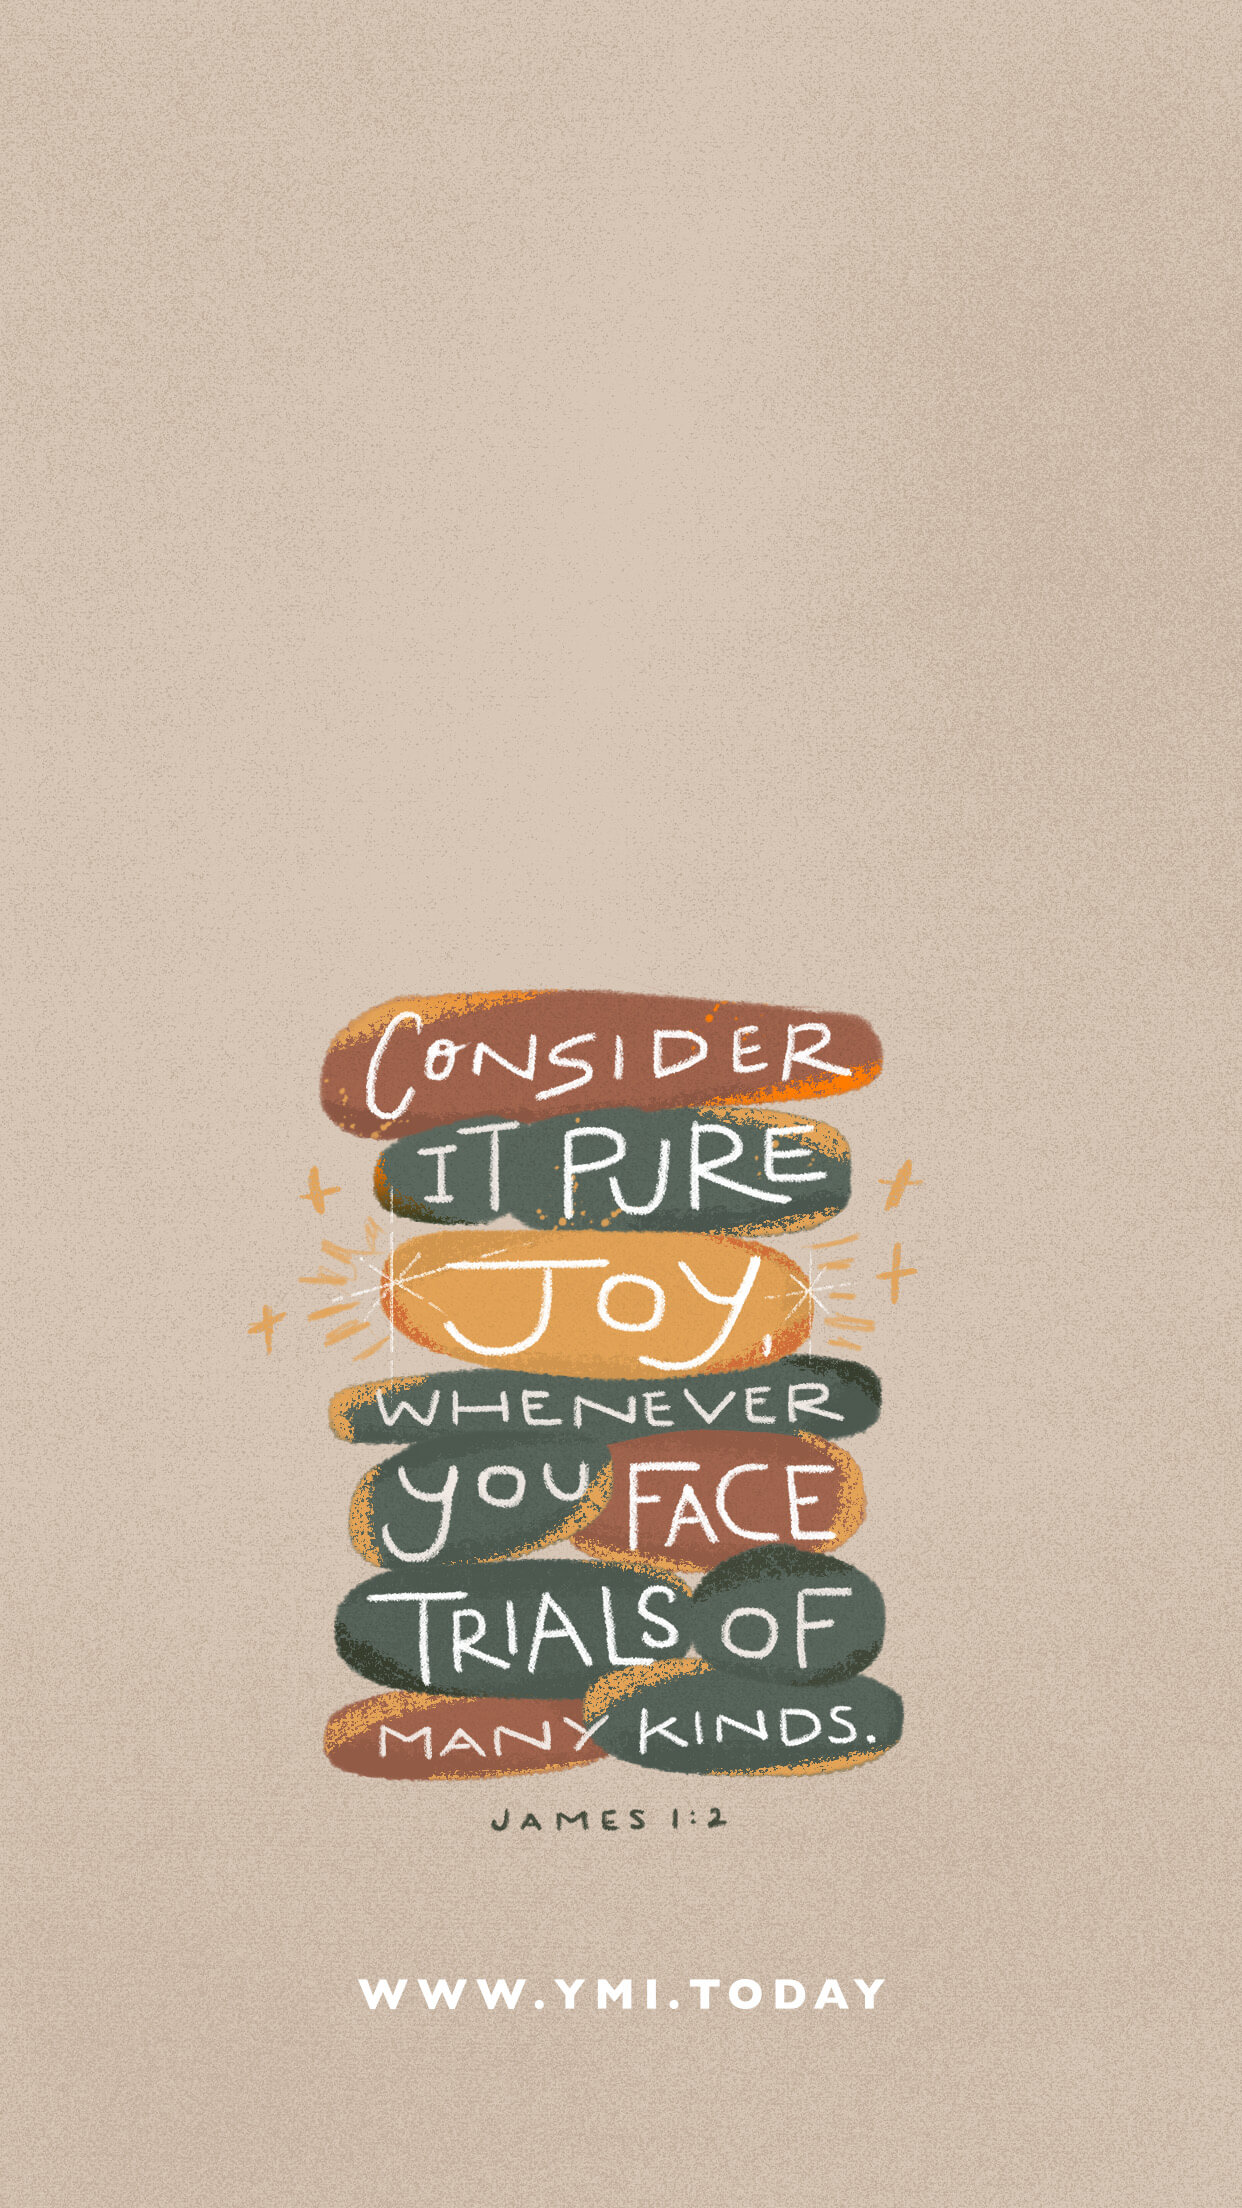 YMI April 2020 Phone Lockscreen - Consider it pure joy whenever you face trials of many kinds. - James 1:2